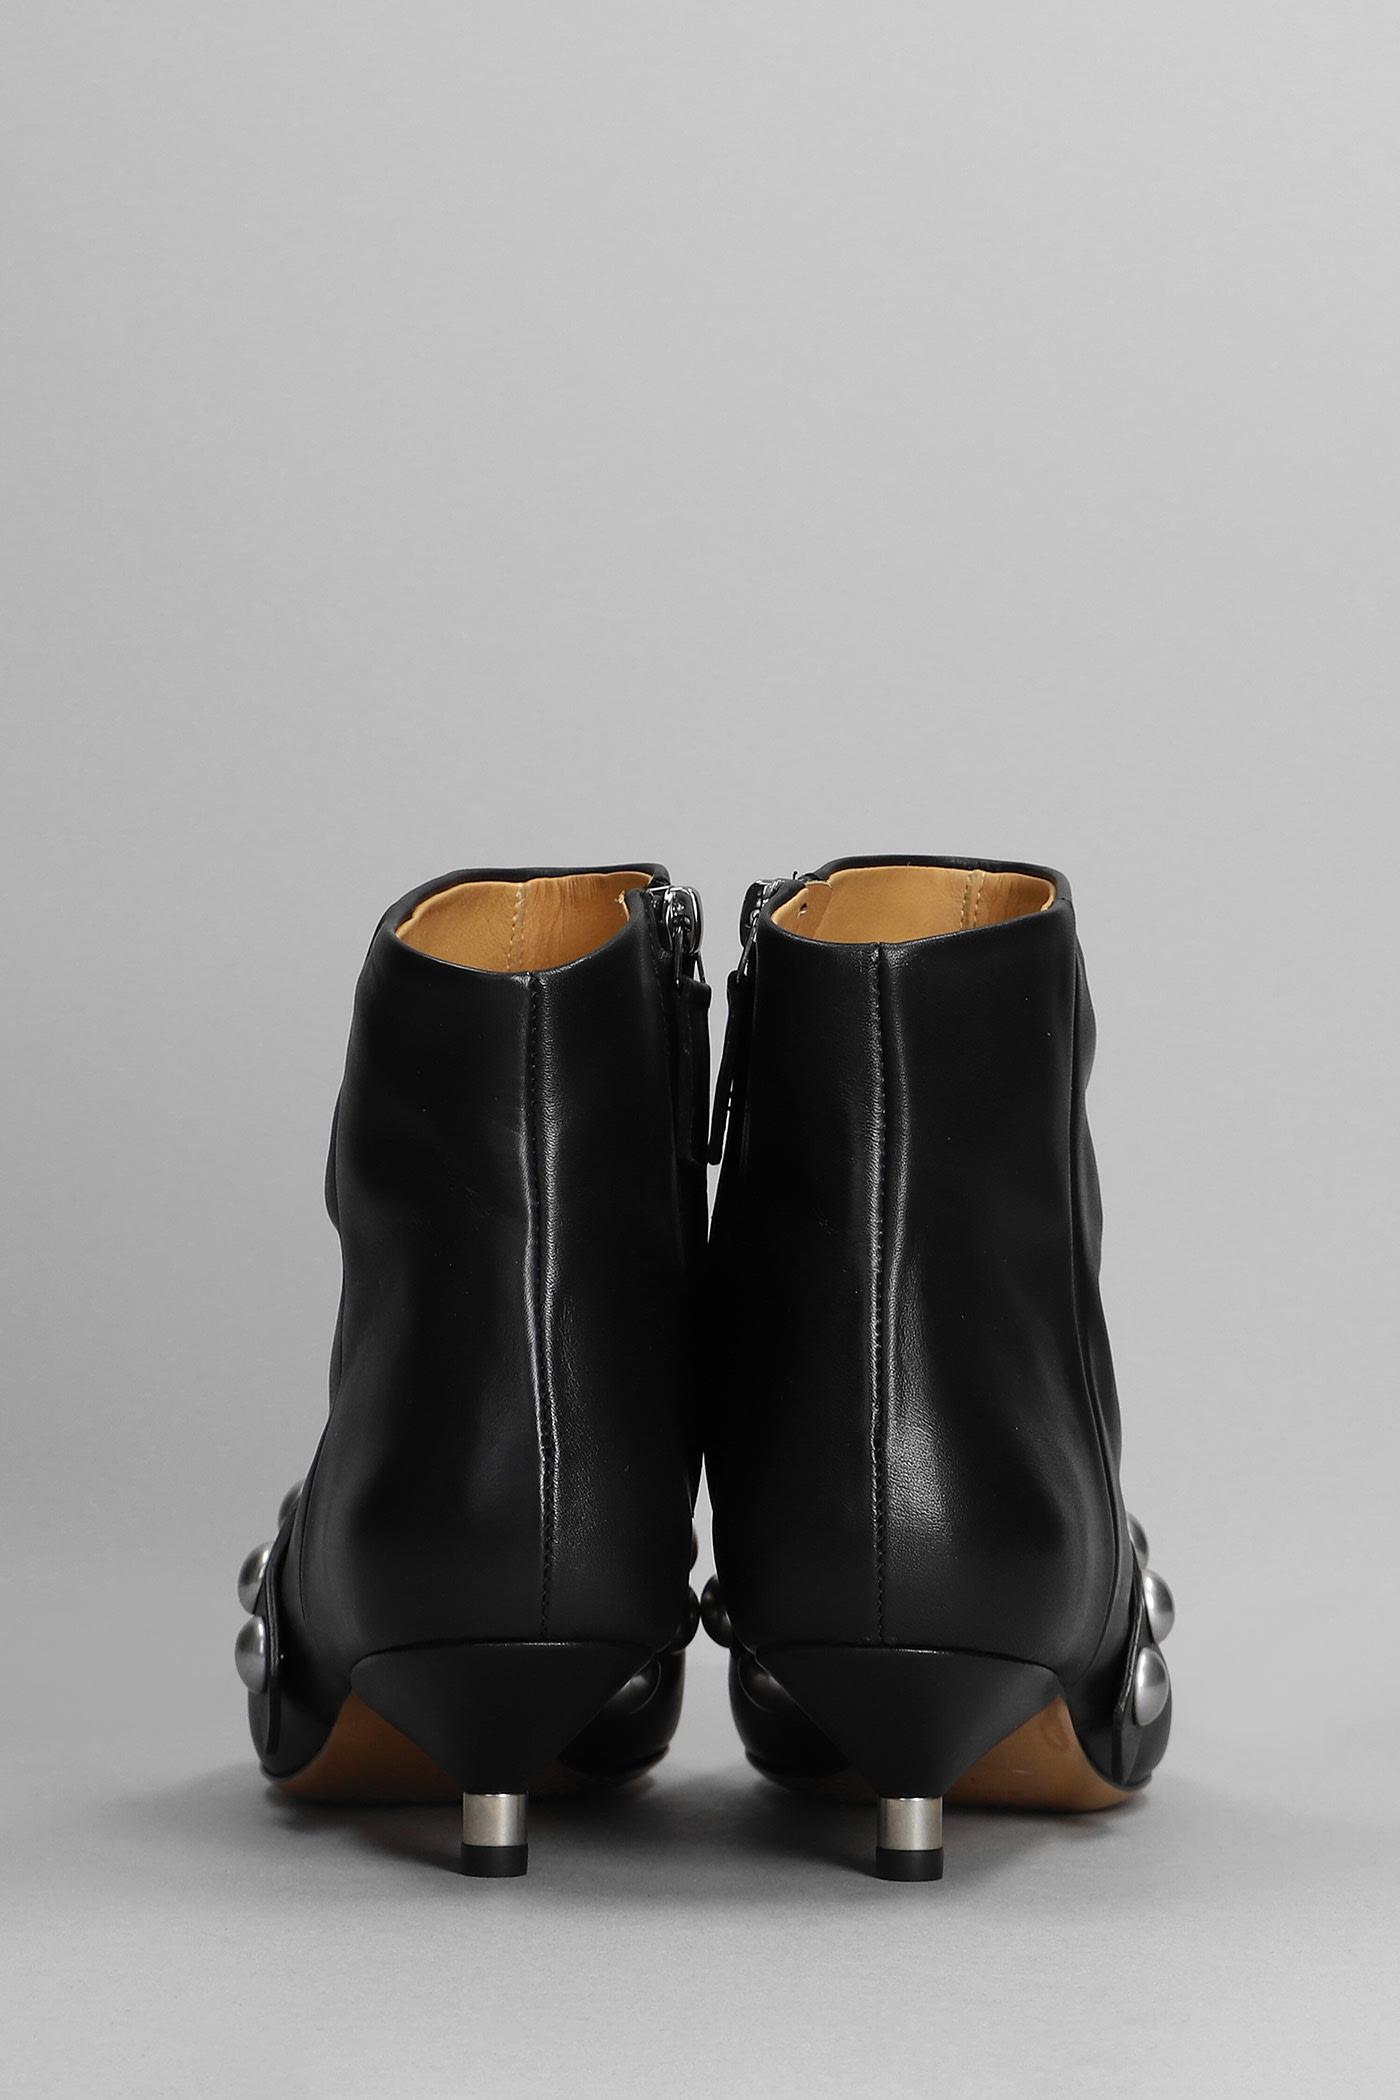 ISABEL MARANT Donatee Leather Ankle Boots - Farfetch